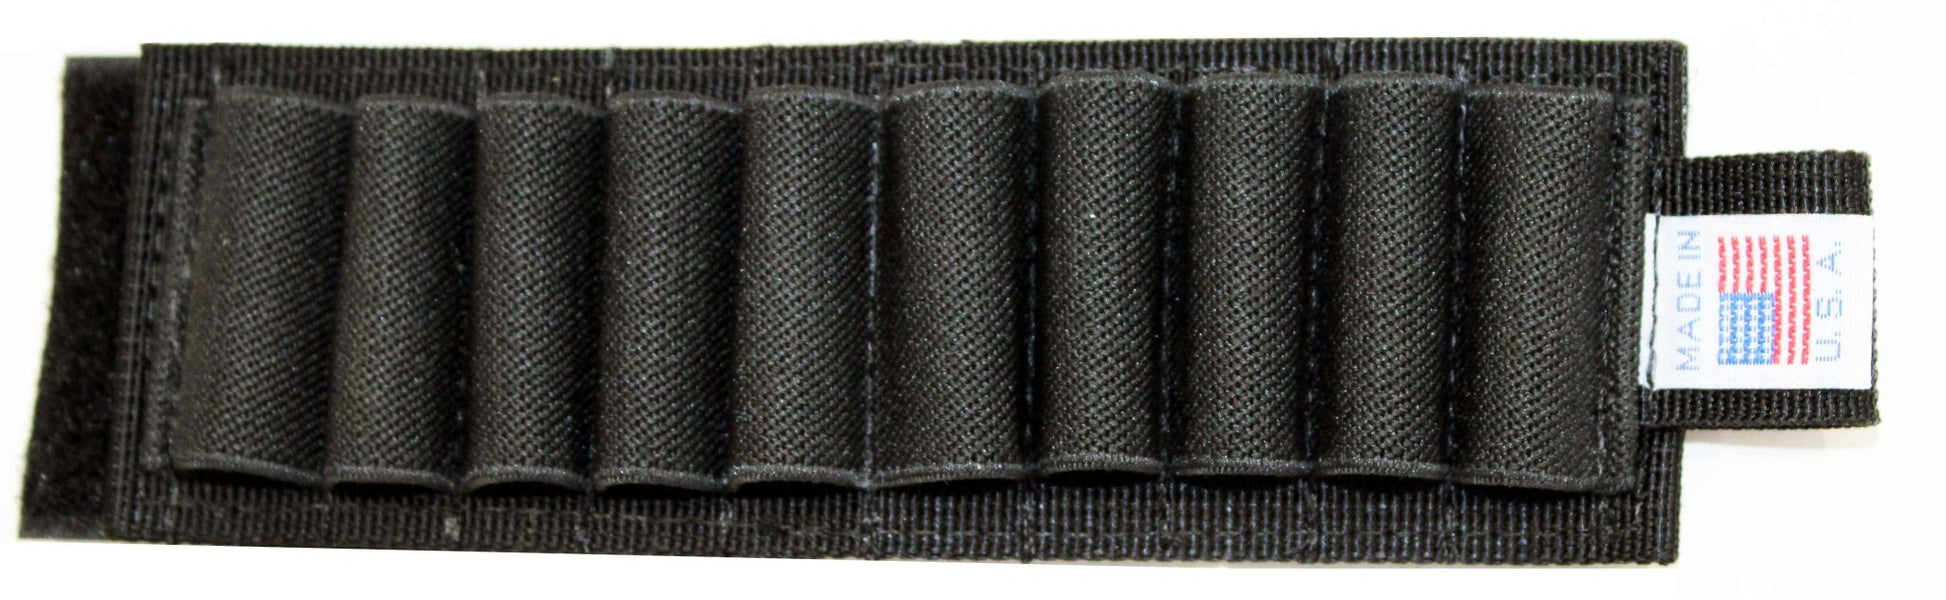 Trinity Shell Carrier Ammo Pouch Compatible with Pointer pop .410 bore. - TRINITY SUPPLY INC